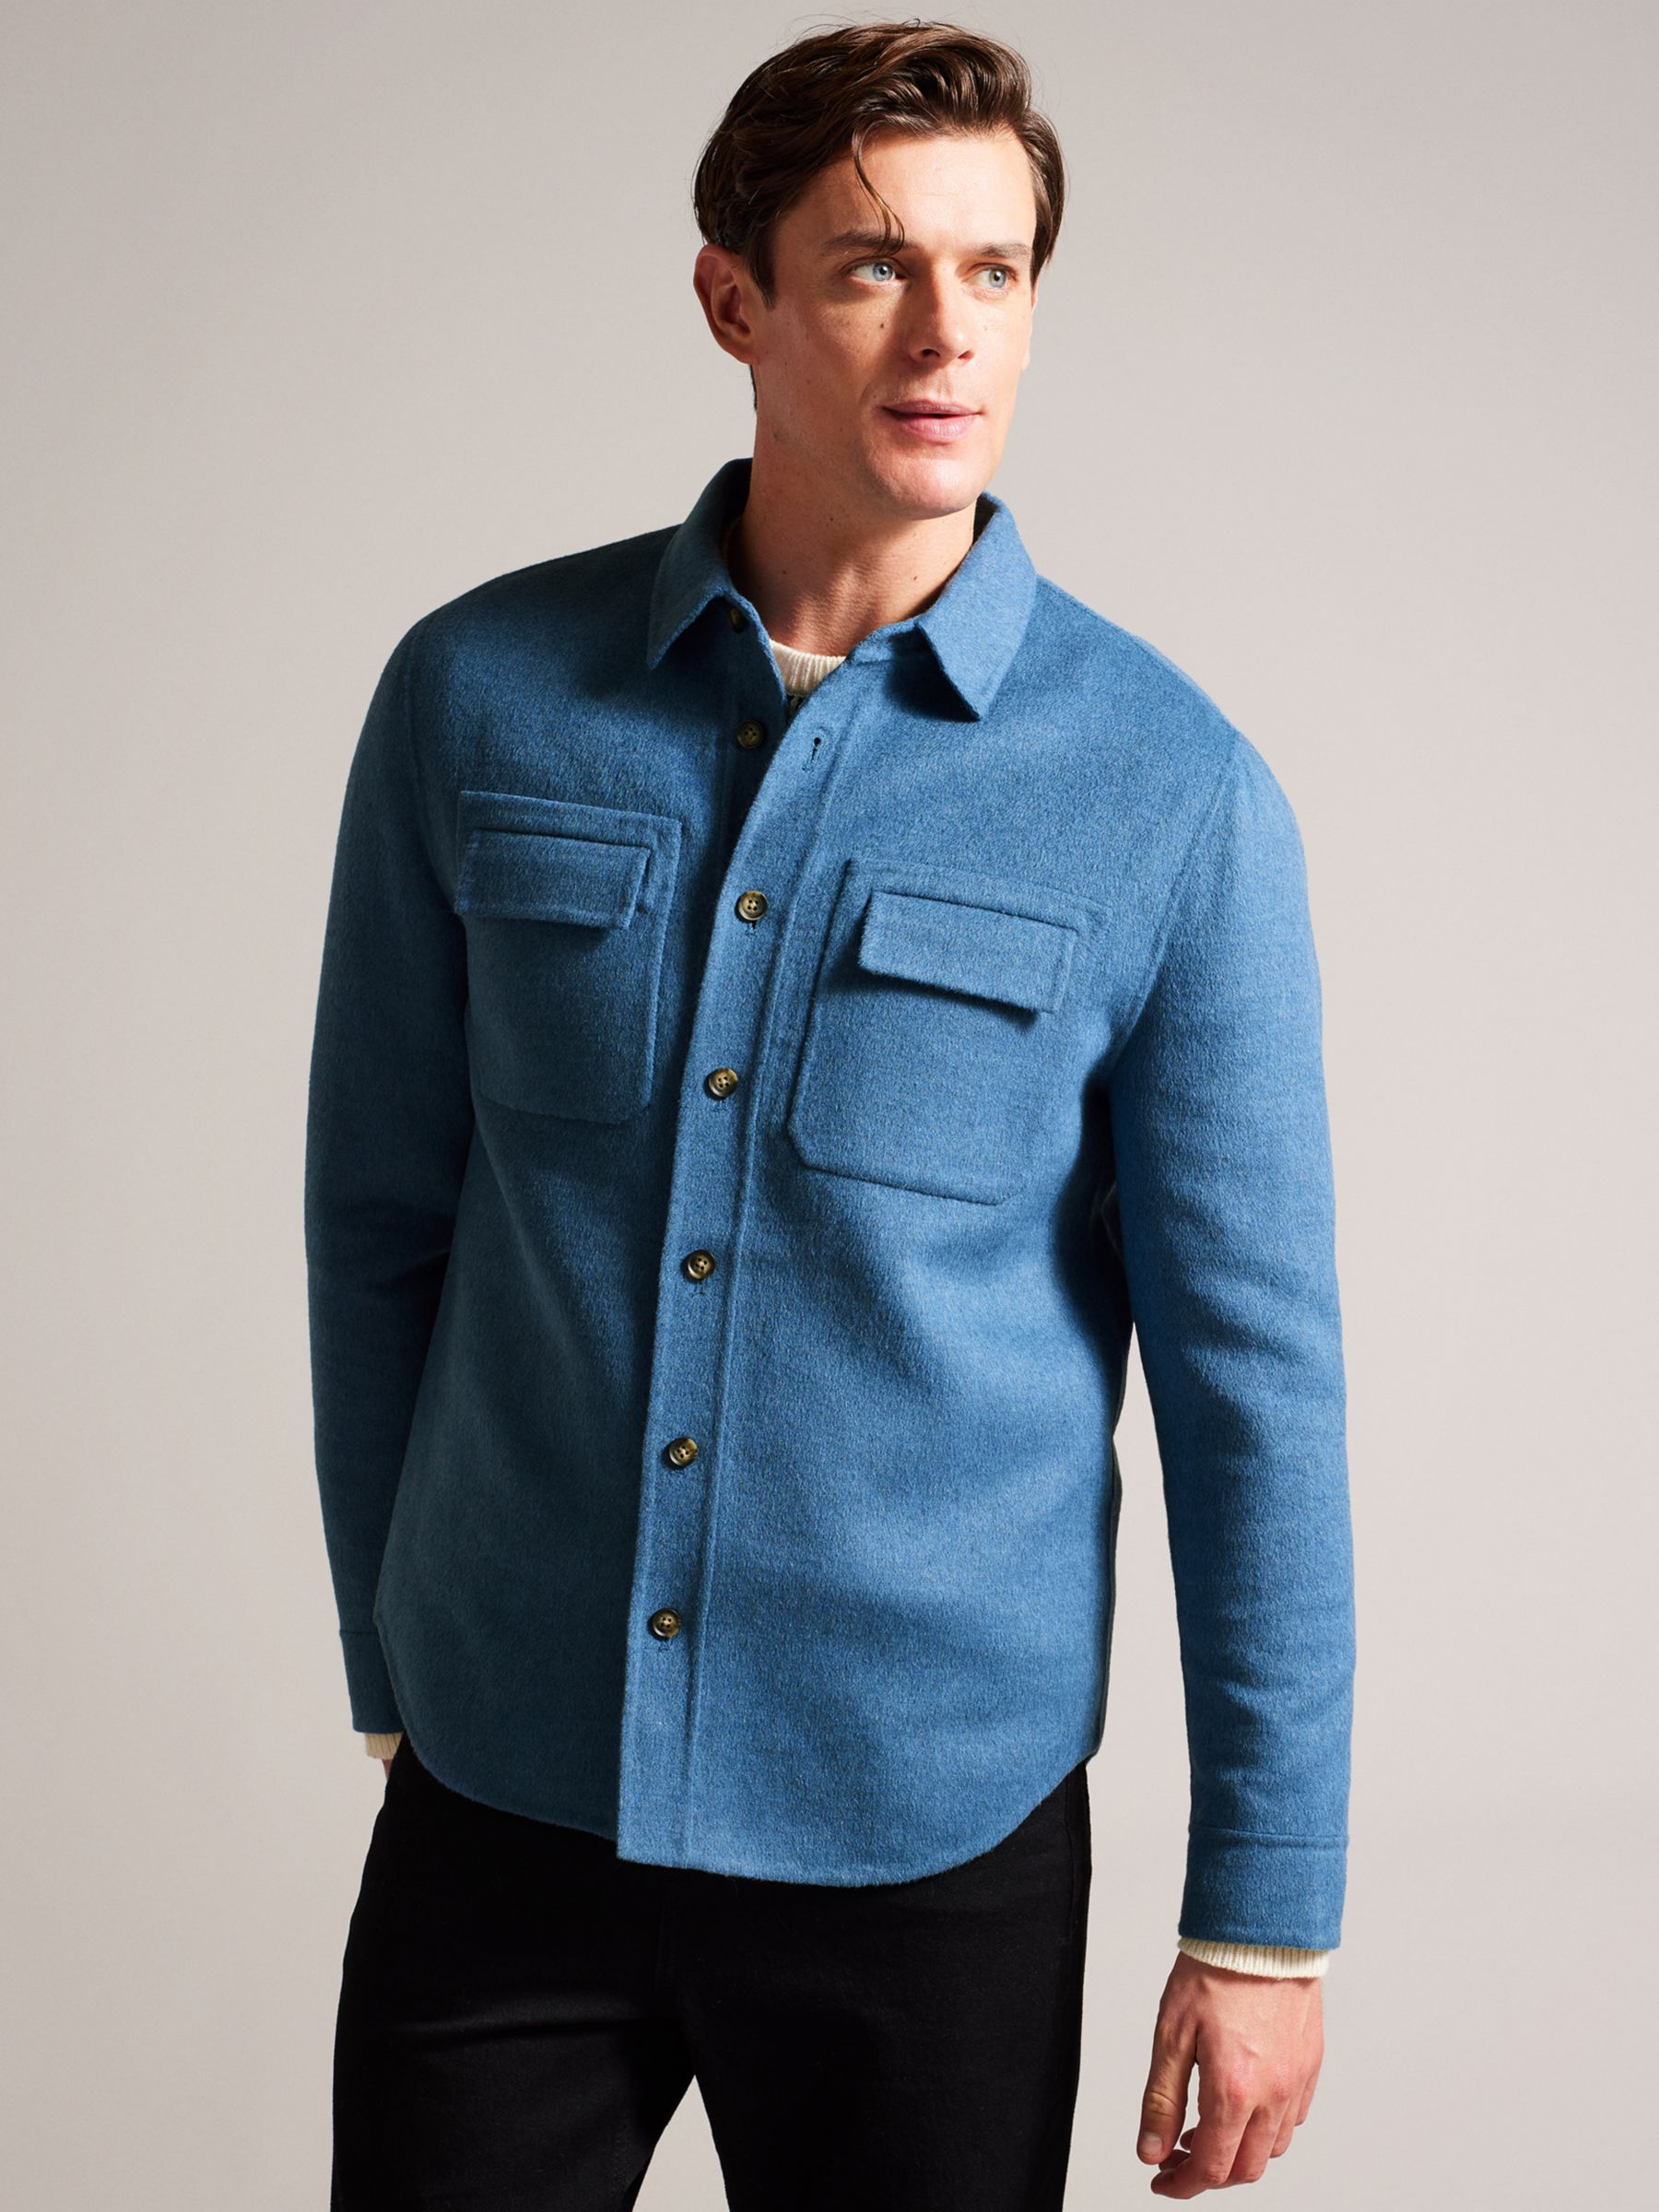 Ted Baker Dalch Wool Blend Shirt, Blue Mid, S